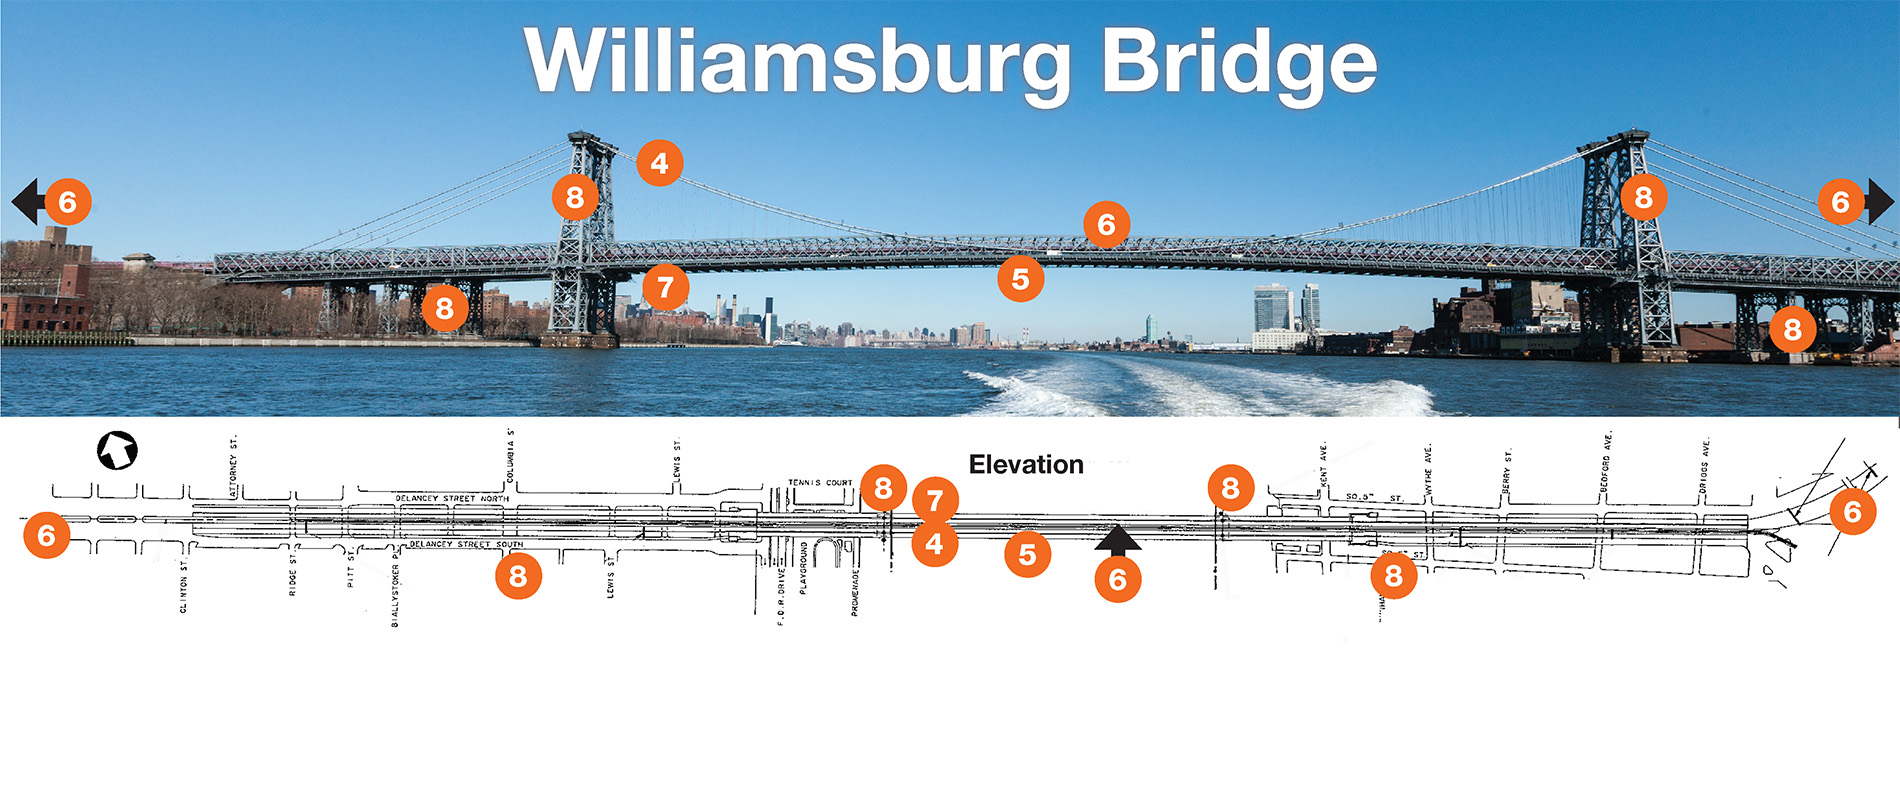 Picture and diagram of the Williamsburg Bridge with labels to highlight where on the bridge work has been done under previous contracts.